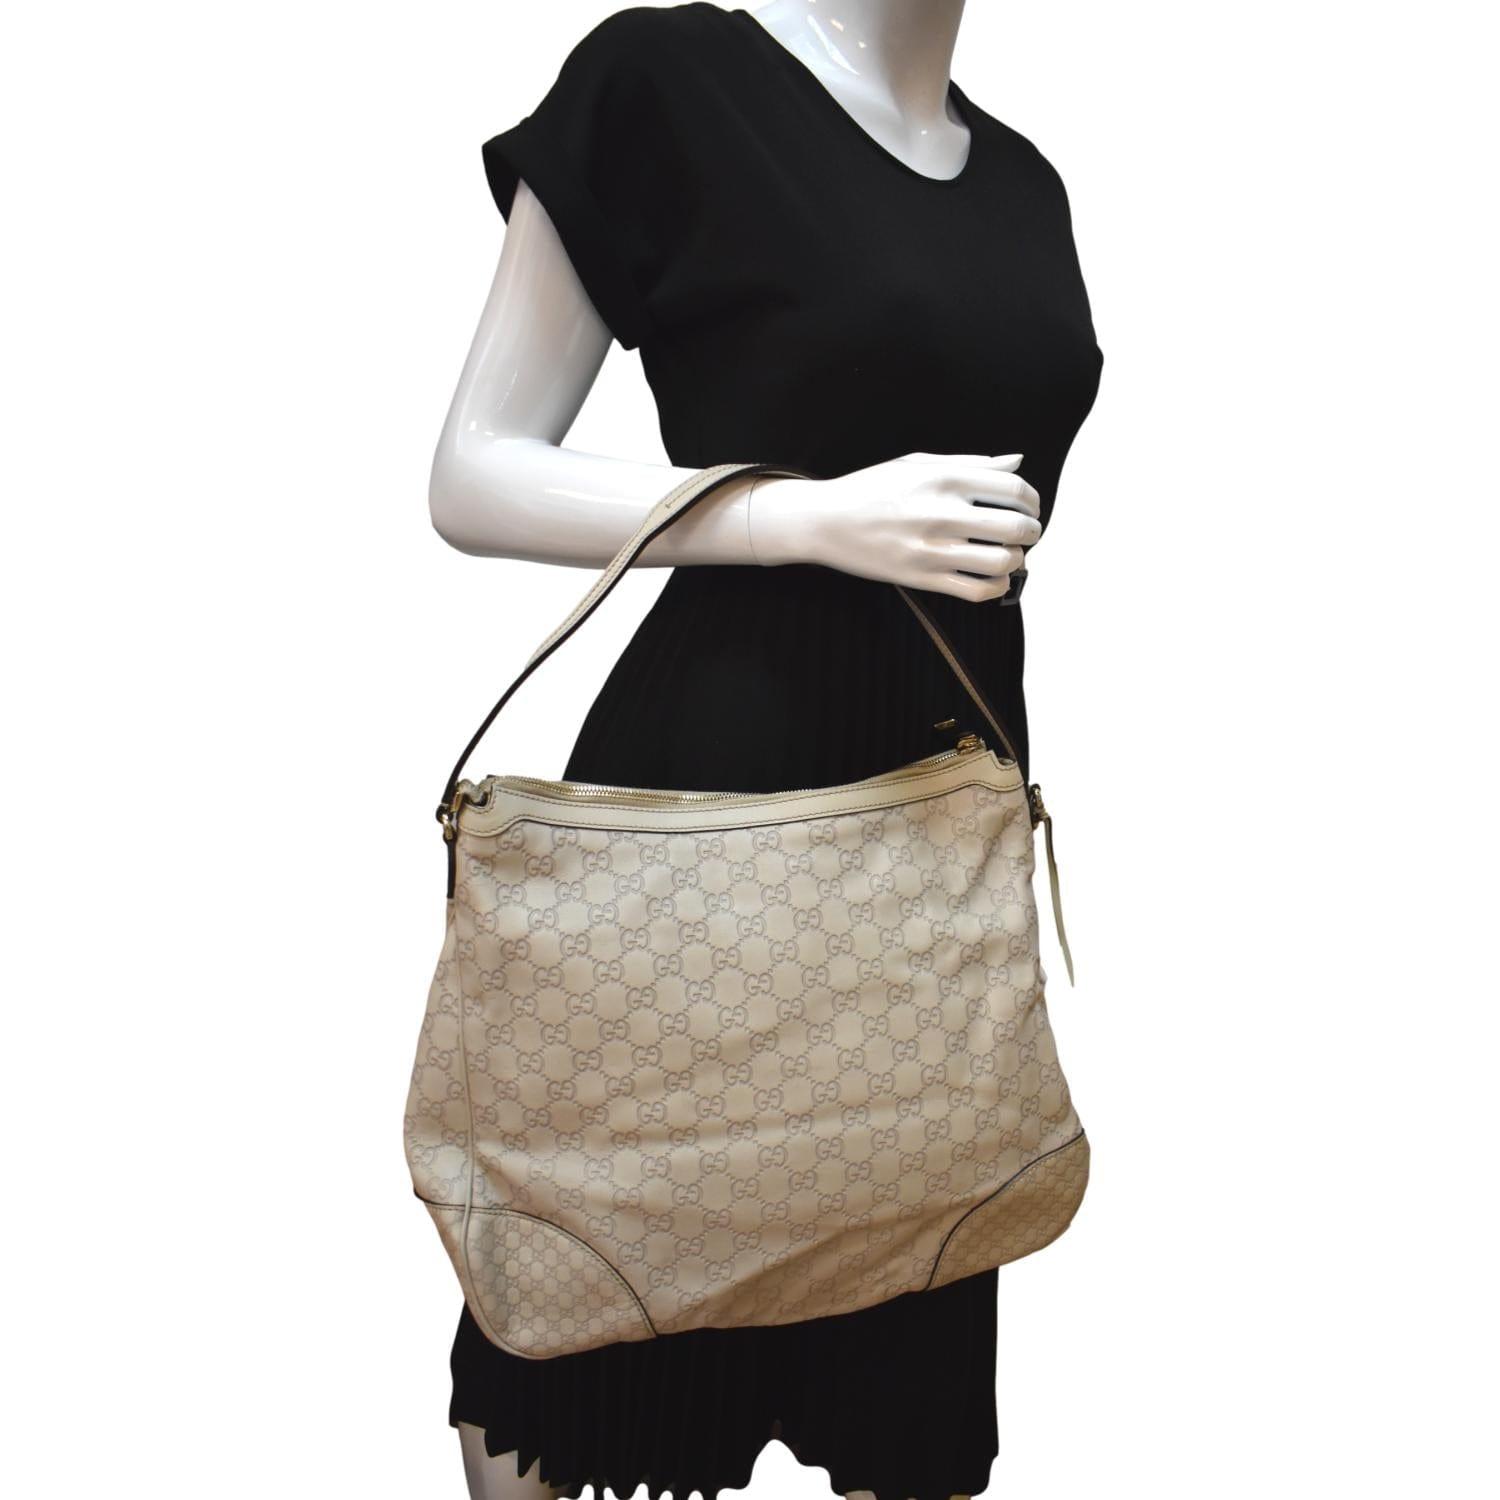 GUCCI PUNCH GUCCISSIMA IVORY LEATHER HOBO BAG - Still in fashion